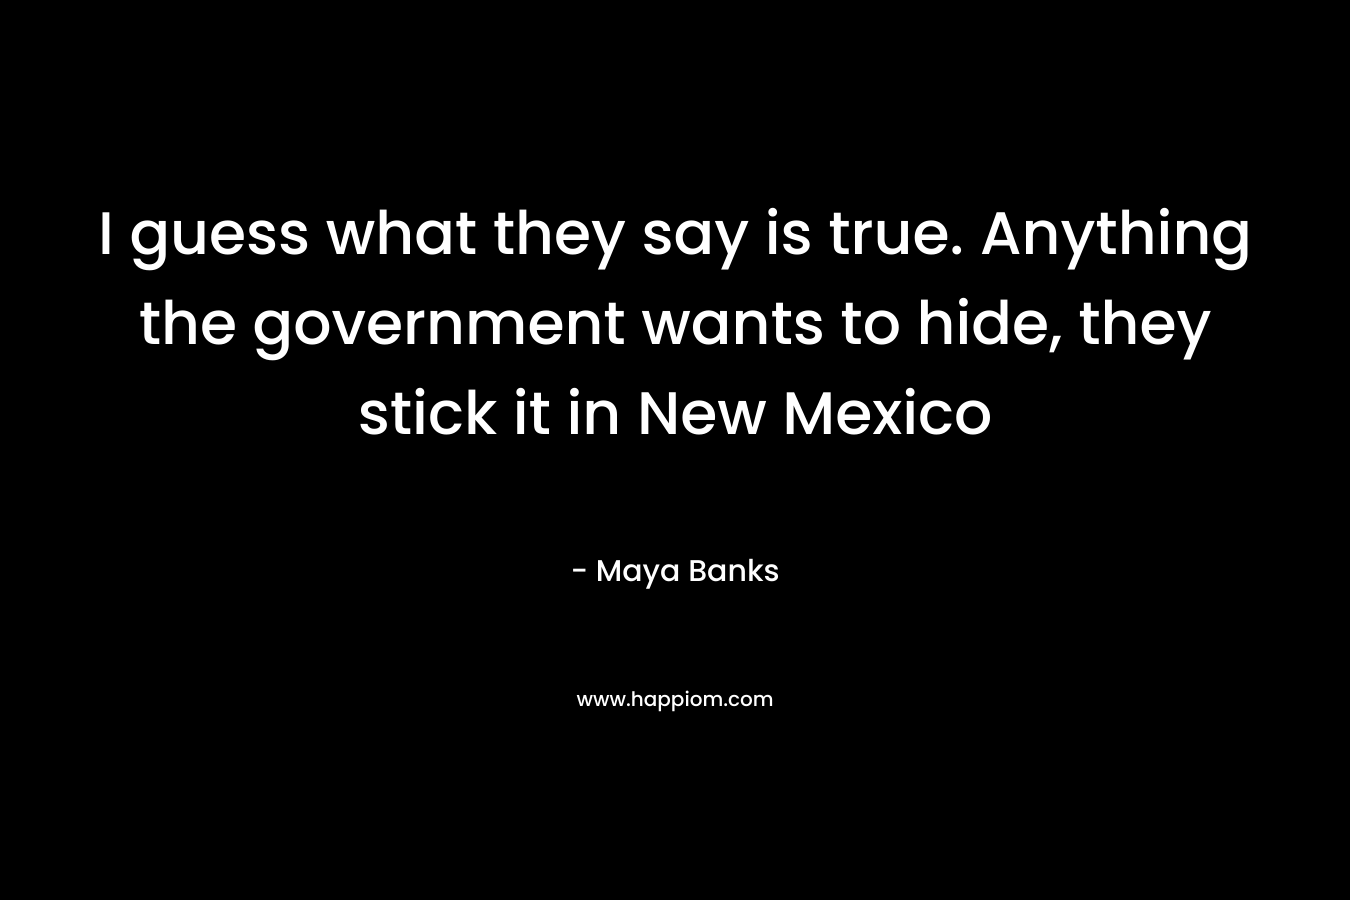 I guess what they say is true. Anything the government wants to hide, they stick it in New Mexico